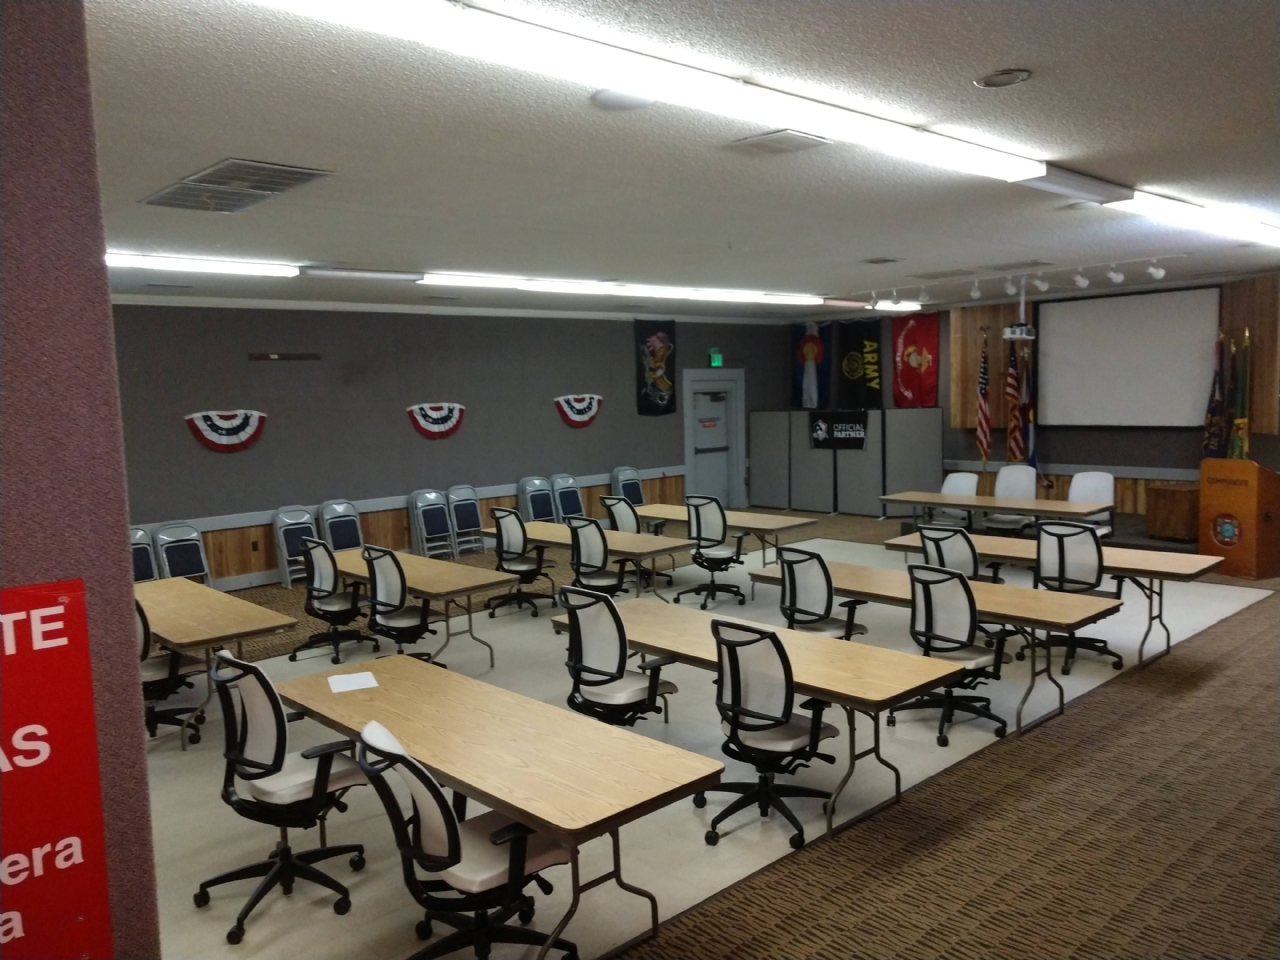 The hall is set up in a conference or classroom format.